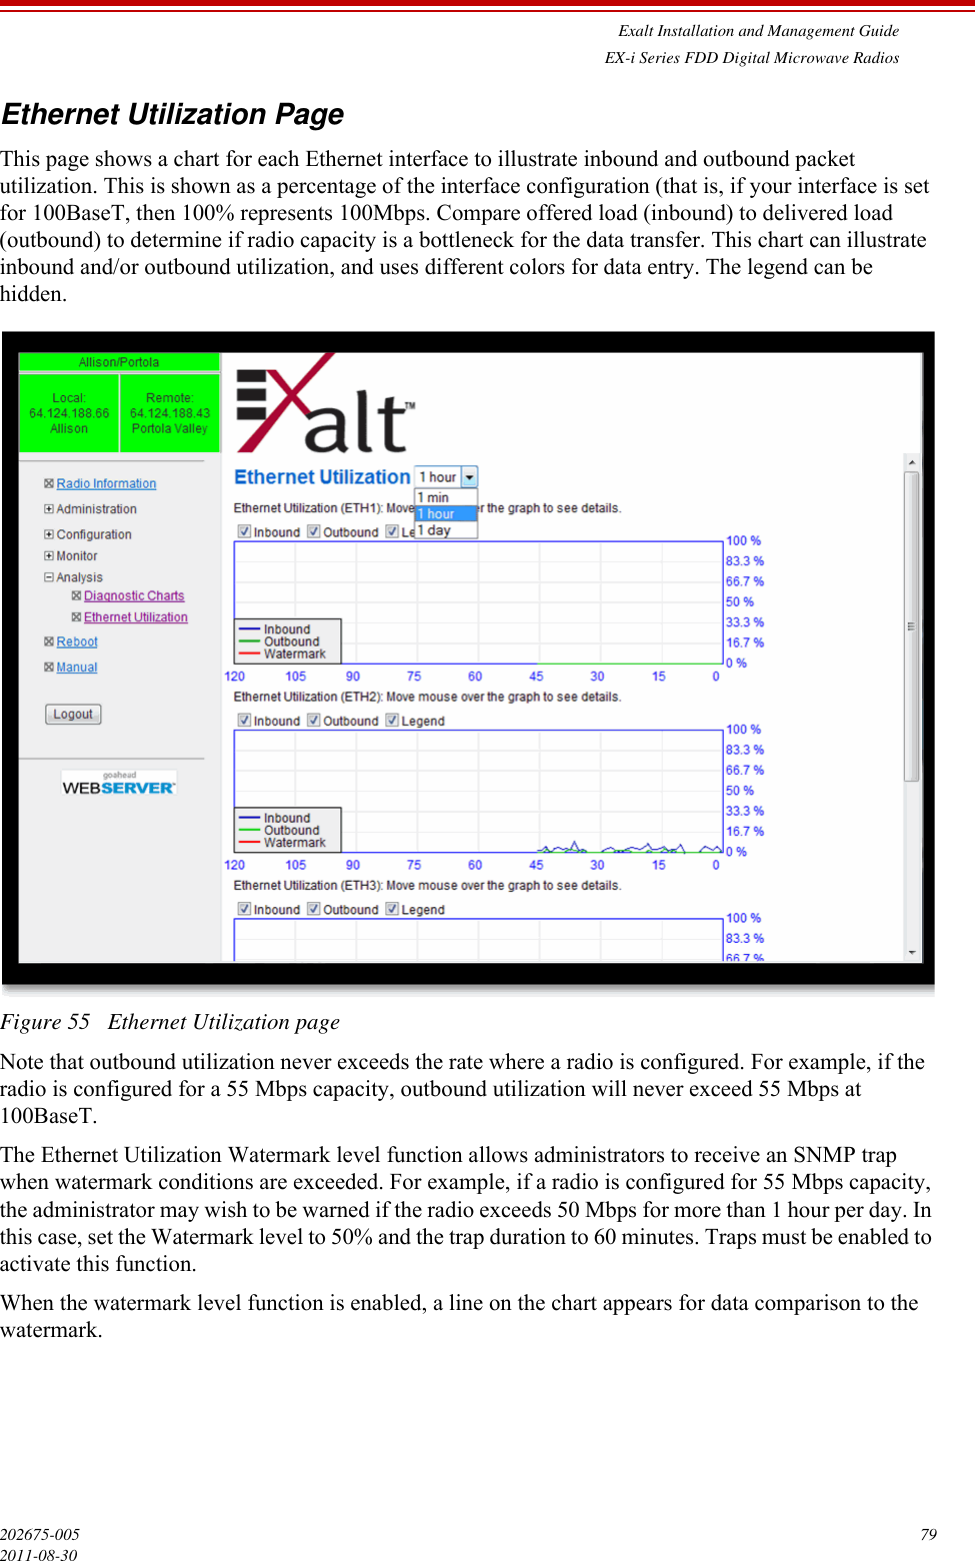 Exalt Installation and Management GuideEX-i Series FDD Digital Microwave Radios202675-005 792011-08-30Ethernet Utilization PageThis page shows a chart for each Ethernet interface to illustrate inbound and outbound packet utilization. This is shown as a percentage of the interface configuration (that is, if your interface is set for 100BaseT, then 100% represents 100Mbps. Compare offered load (inbound) to delivered load (outbound) to determine if radio capacity is a bottleneck for the data transfer. This chart can illustrate inbound and/or outbound utilization, and uses different colors for data entry. The legend can be hidden.Figure 55   Ethernet Utilization pageNote that outbound utilization never exceeds the rate where a radio is configured. For example, if the radio is configured for a 55 Mbps capacity, outbound utilization will never exceed 55 Mbps at 100BaseT.The Ethernet Utilization Watermark level function allows administrators to receive an SNMP trap when watermark conditions are exceeded. For example, if a radio is configured for 55 Mbps capacity, the administrator may wish to be warned if the radio exceeds 50 Mbps for more than 1 hour per day. In this case, set the Watermark level to 50% and the trap duration to 60 minutes. Traps must be enabled to activate this function.When the watermark level function is enabled, a line on the chart appears for data comparison to the watermark.